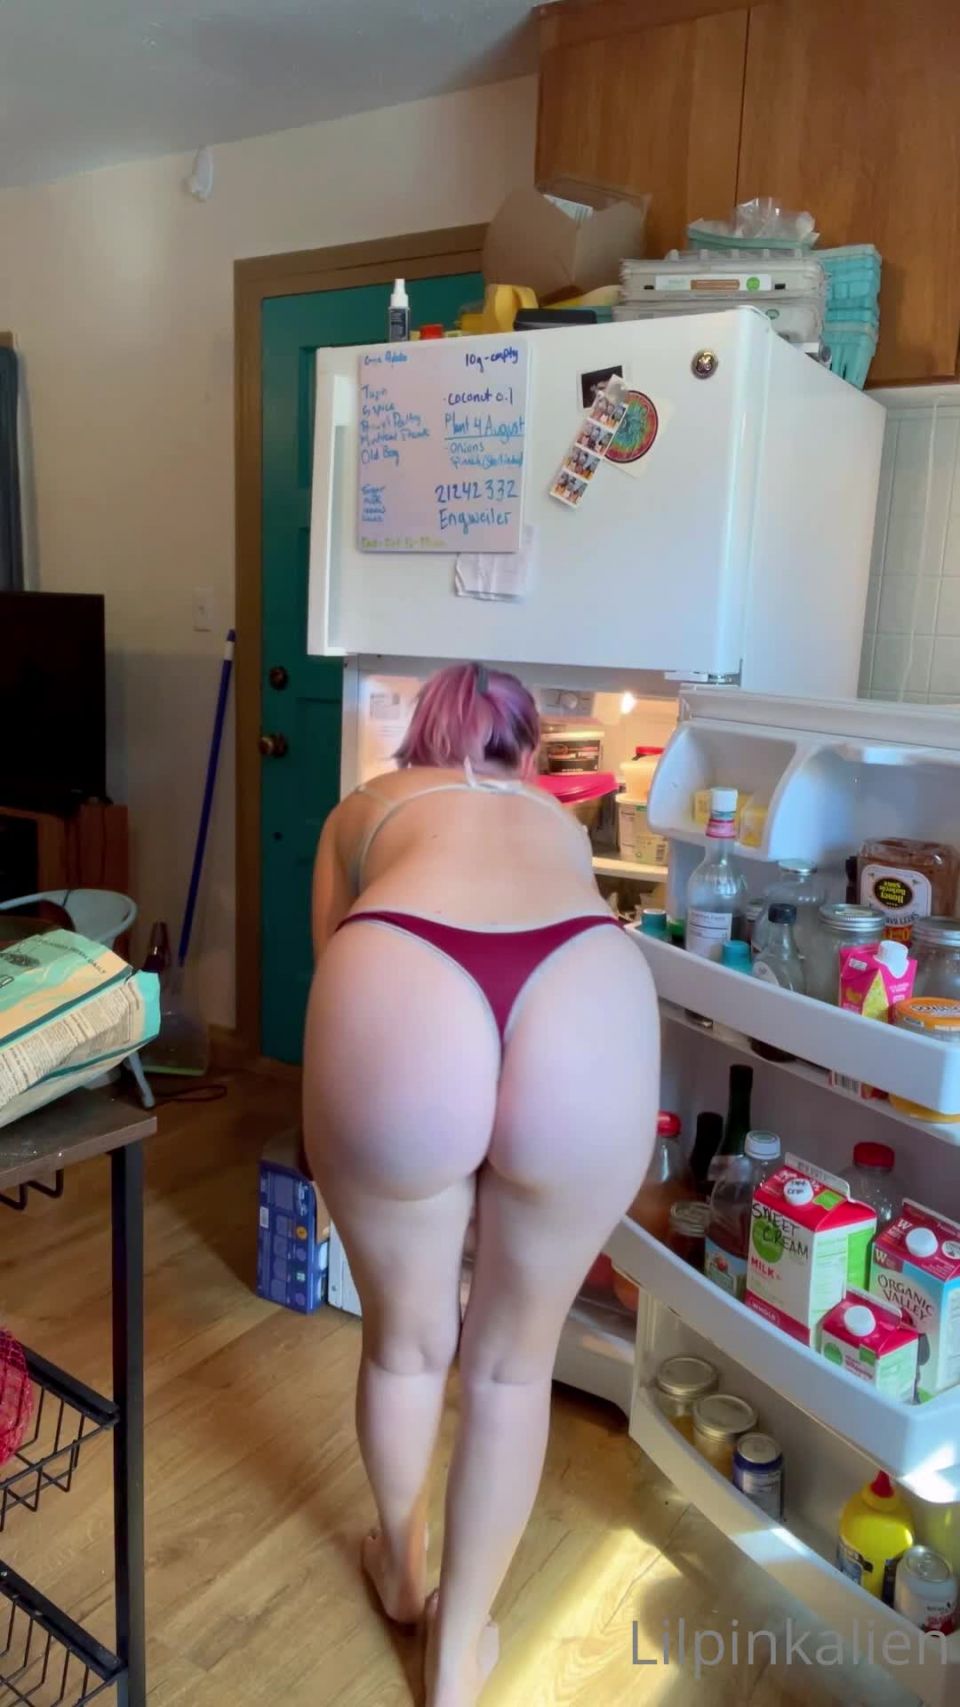 Onlyfans - Lilpinkalien - POV you catch me taking the last beer out of the fridgeand I drink it instead of hangin - 24-09-2021